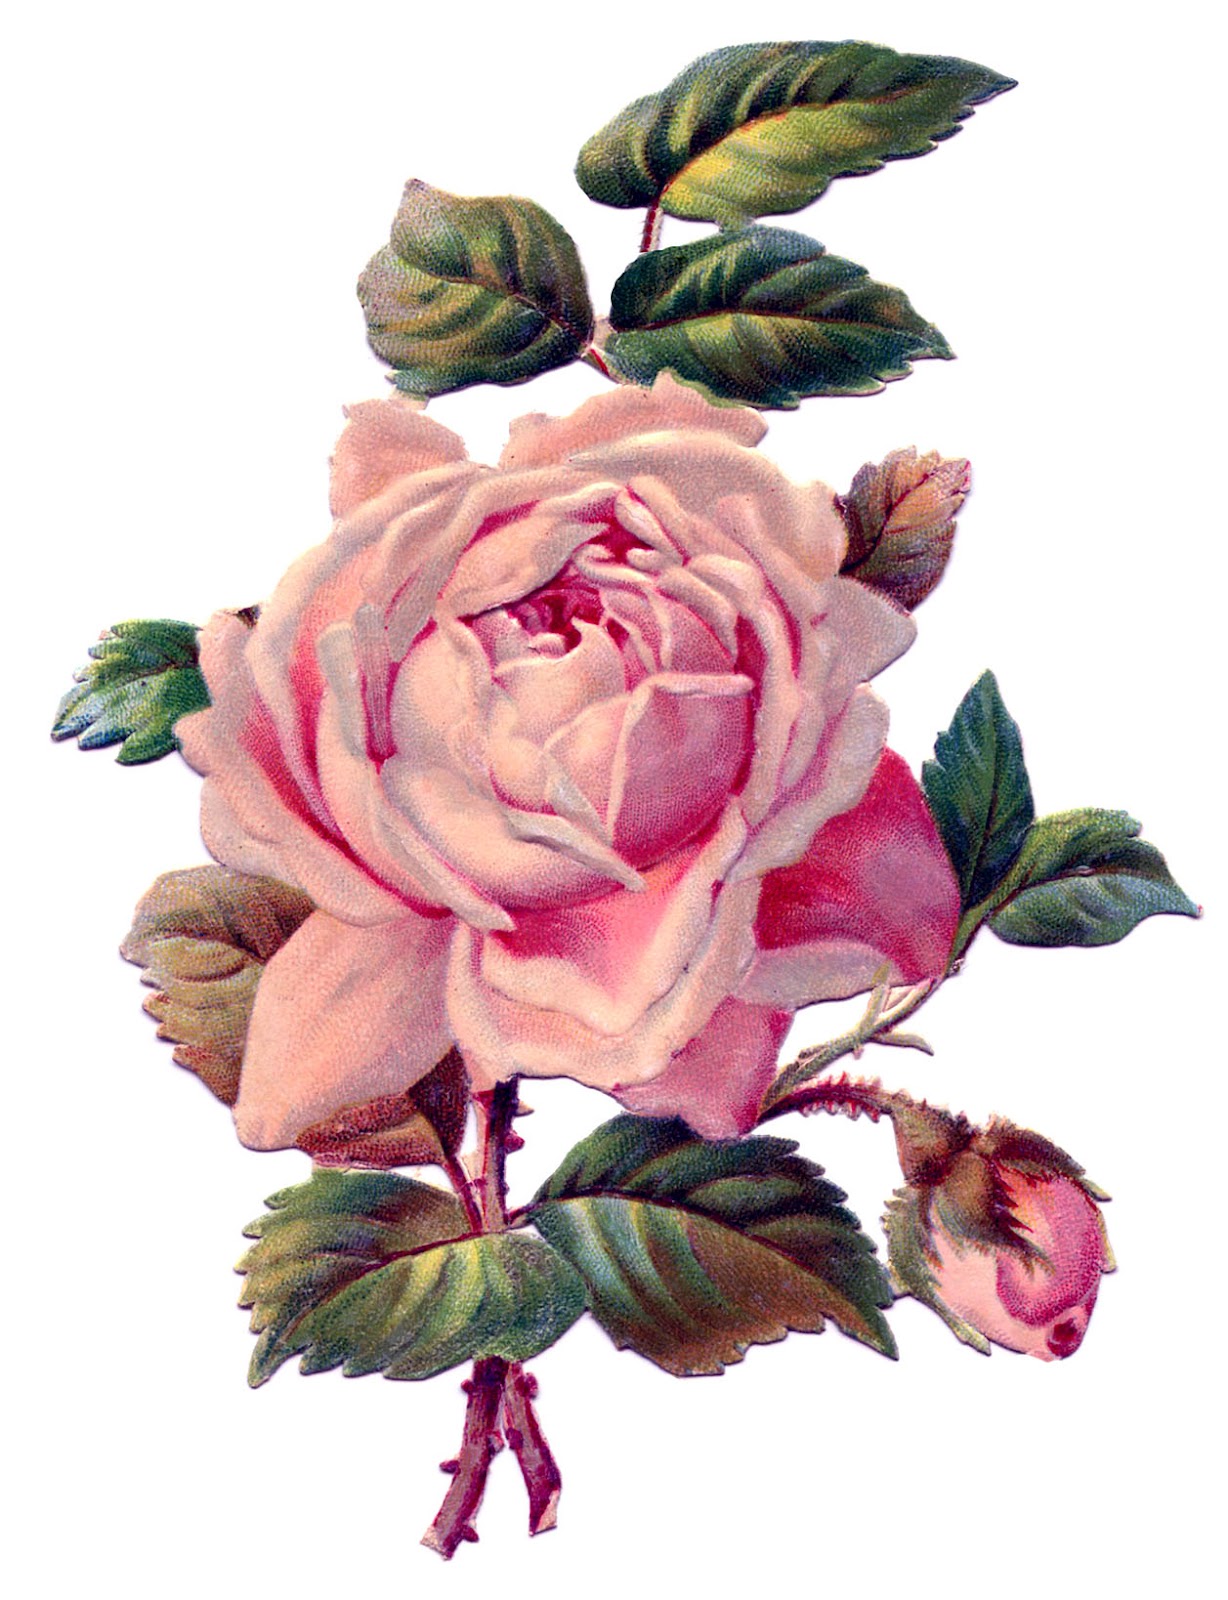 Vintage Image - Pretty Pink Rose - The Graphics Fairy